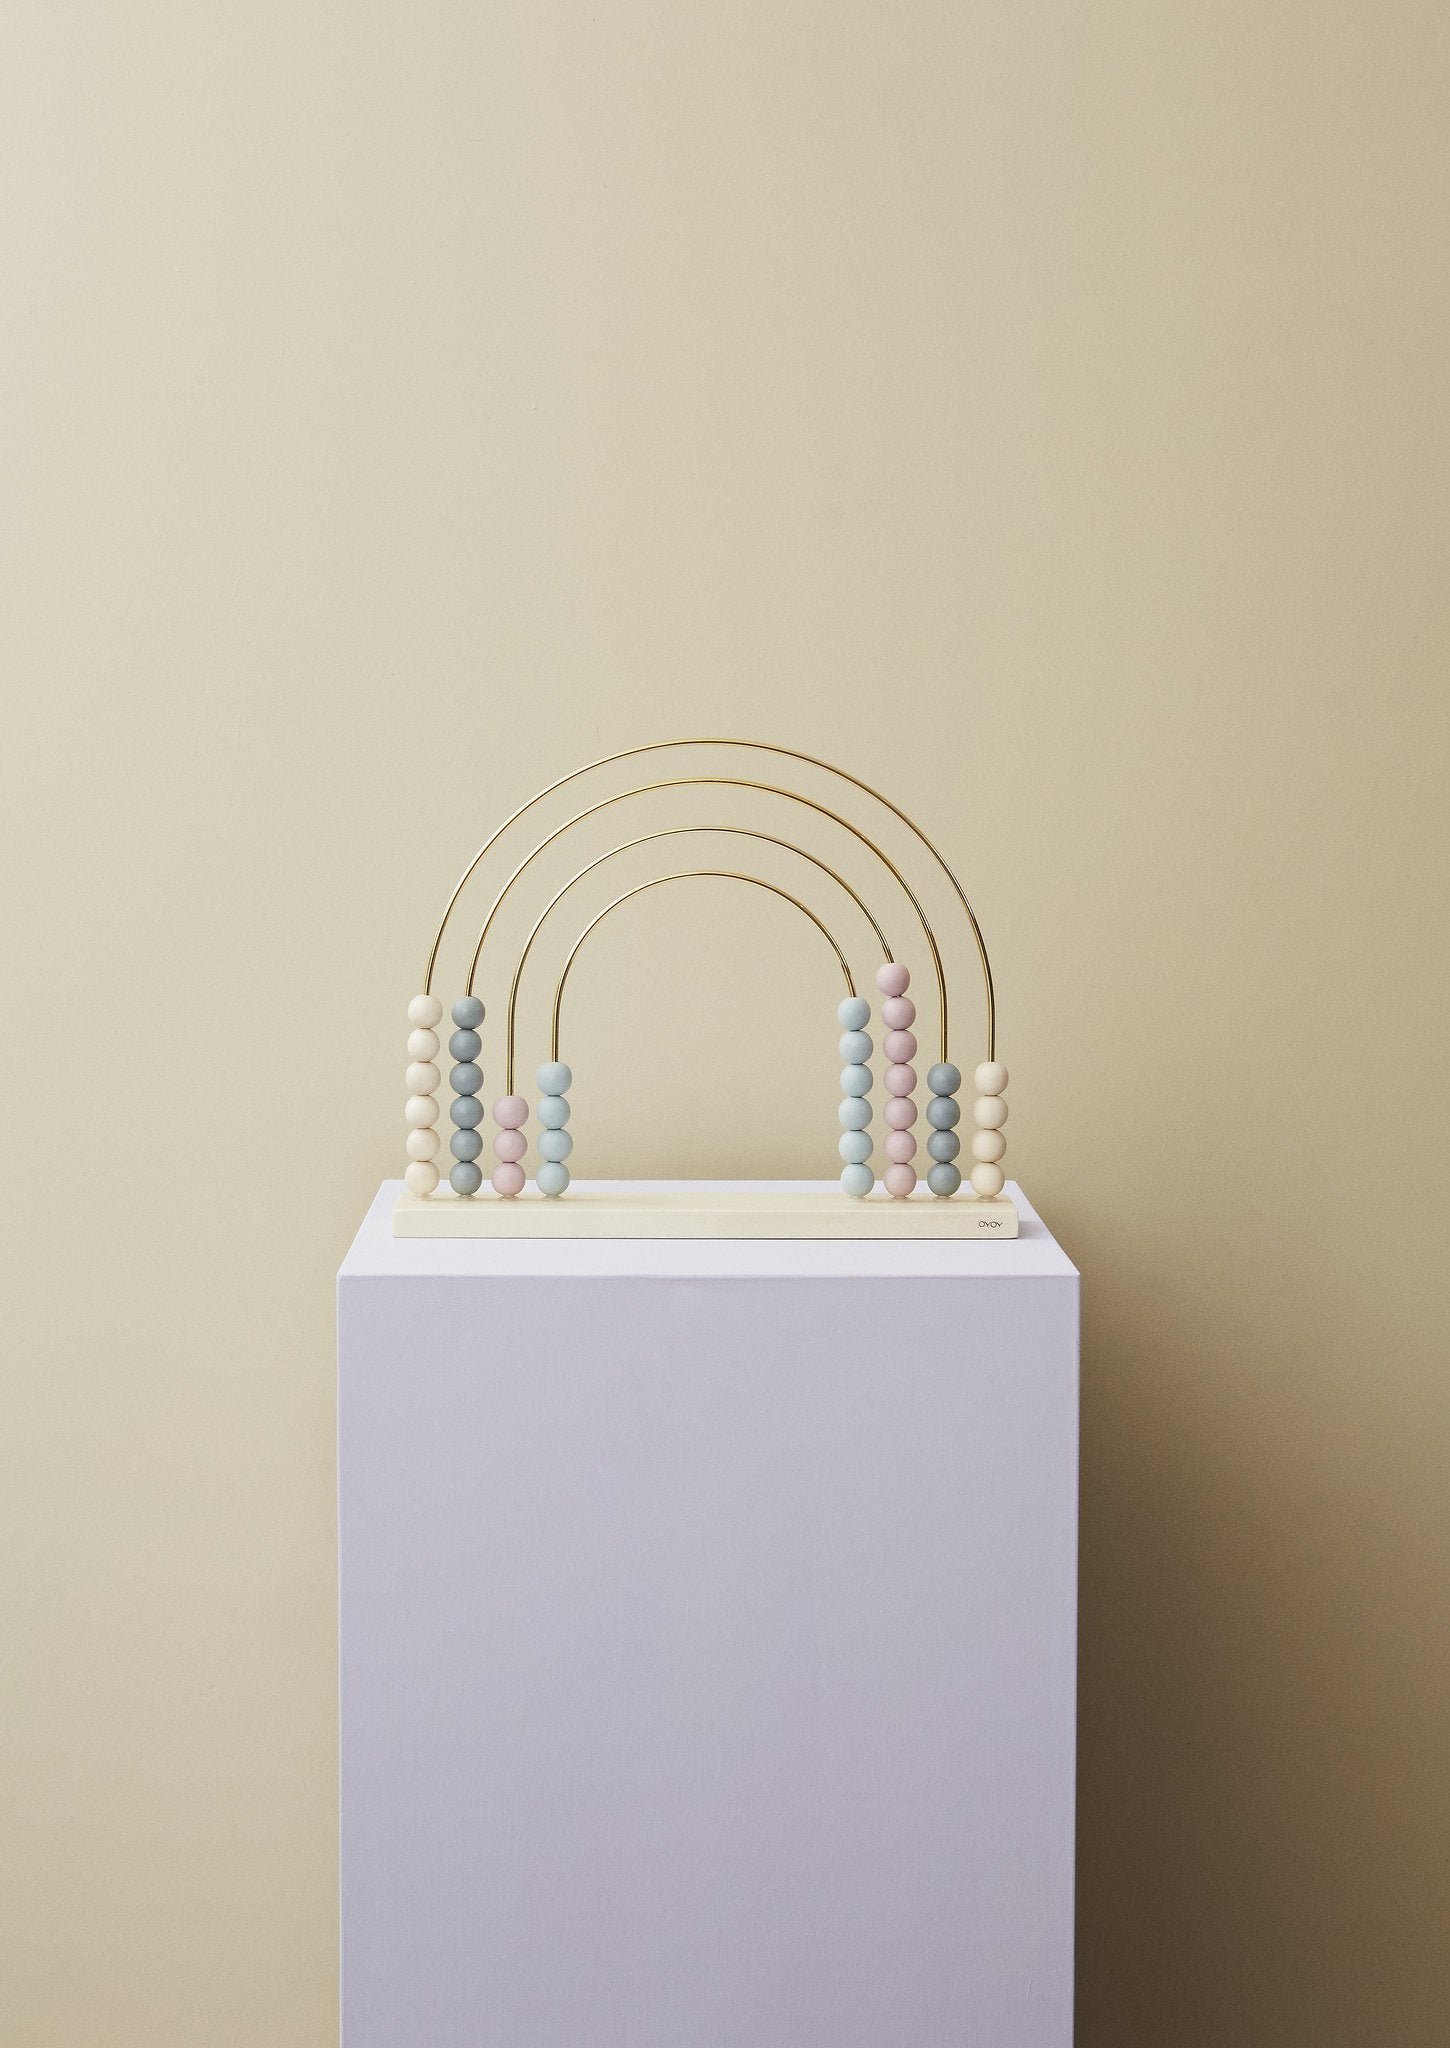 OYOY Living Design - OYOY MINI Abacus Rainbow Wooden Toy 901 Nature